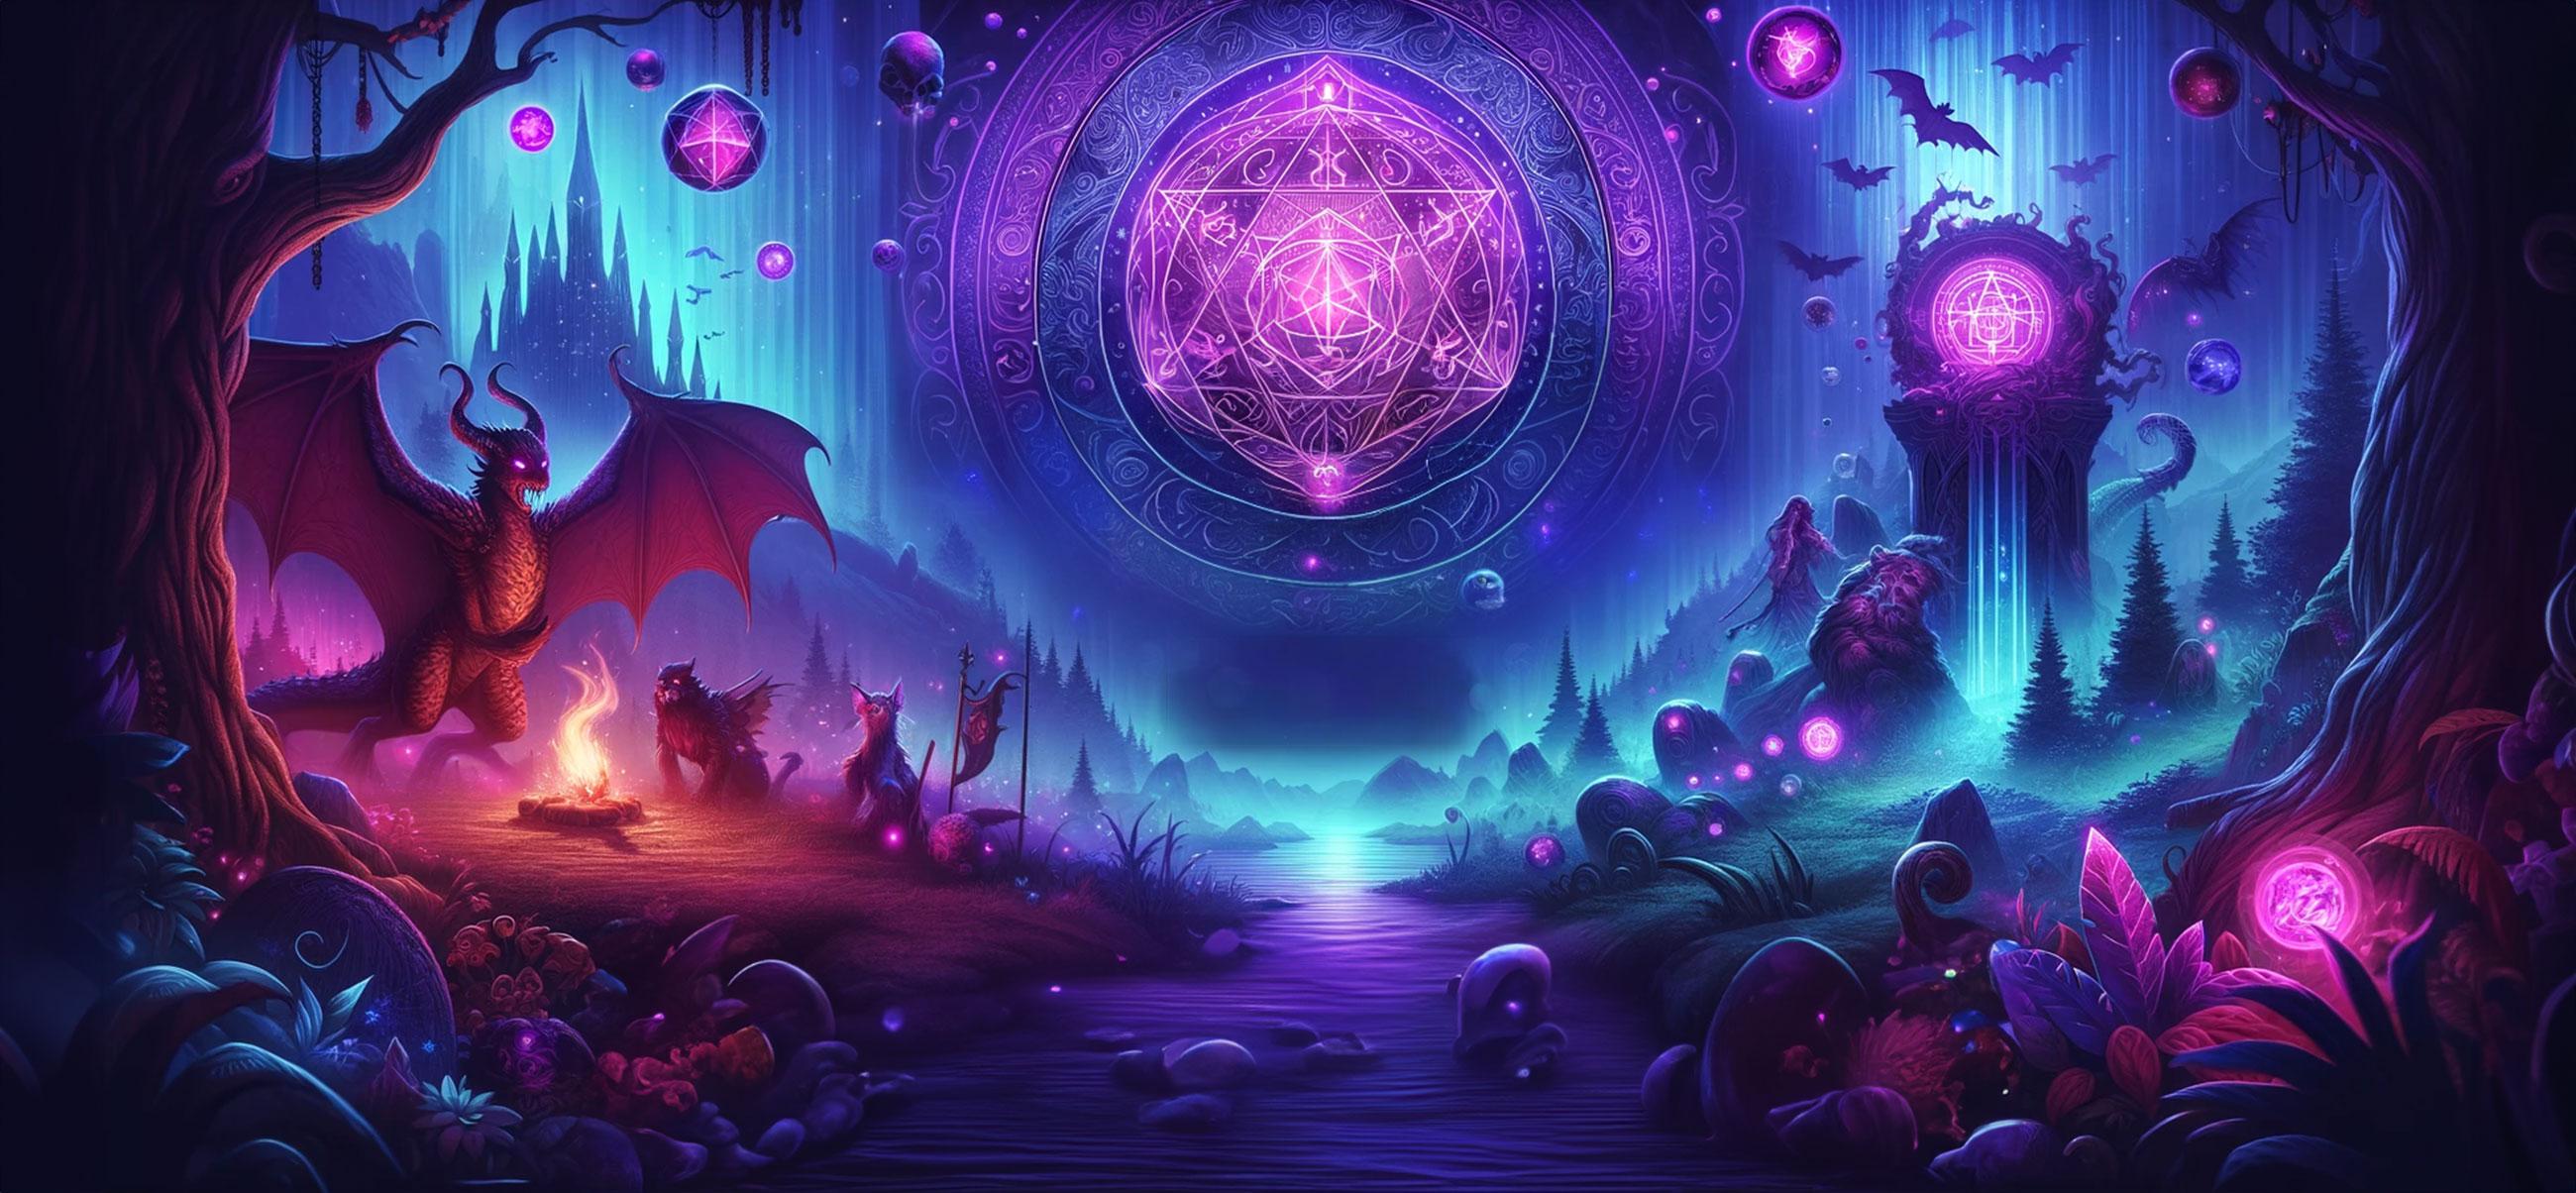 Background image of many summons in a magical world